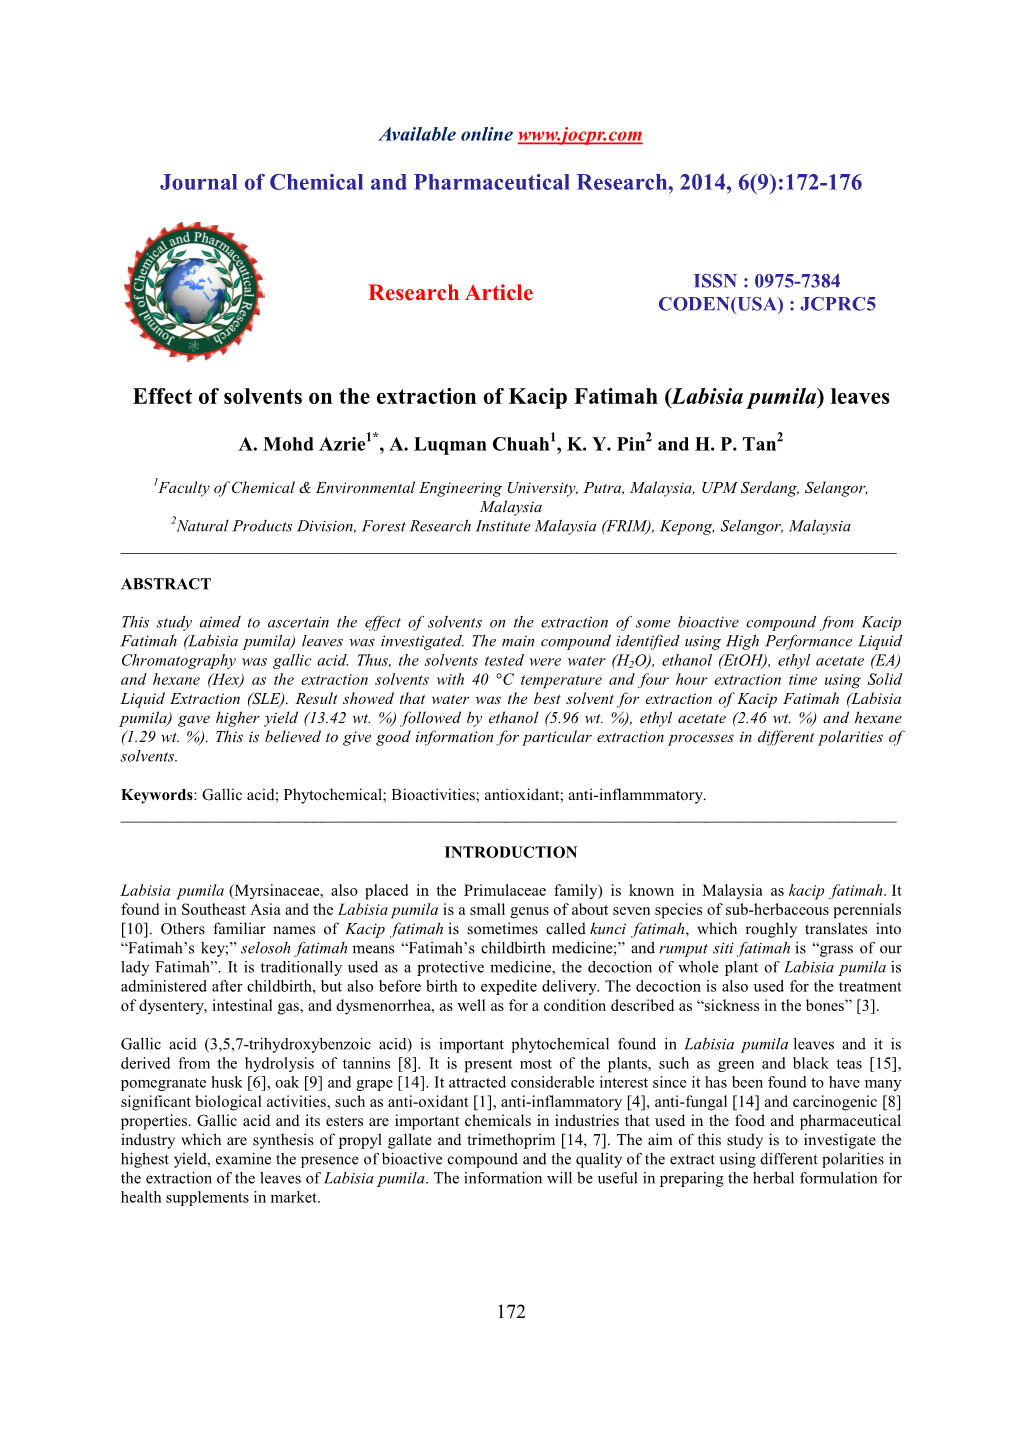 Effect of Solvents on the Extraction of Kacip Fatimah (Labisia Pumila)